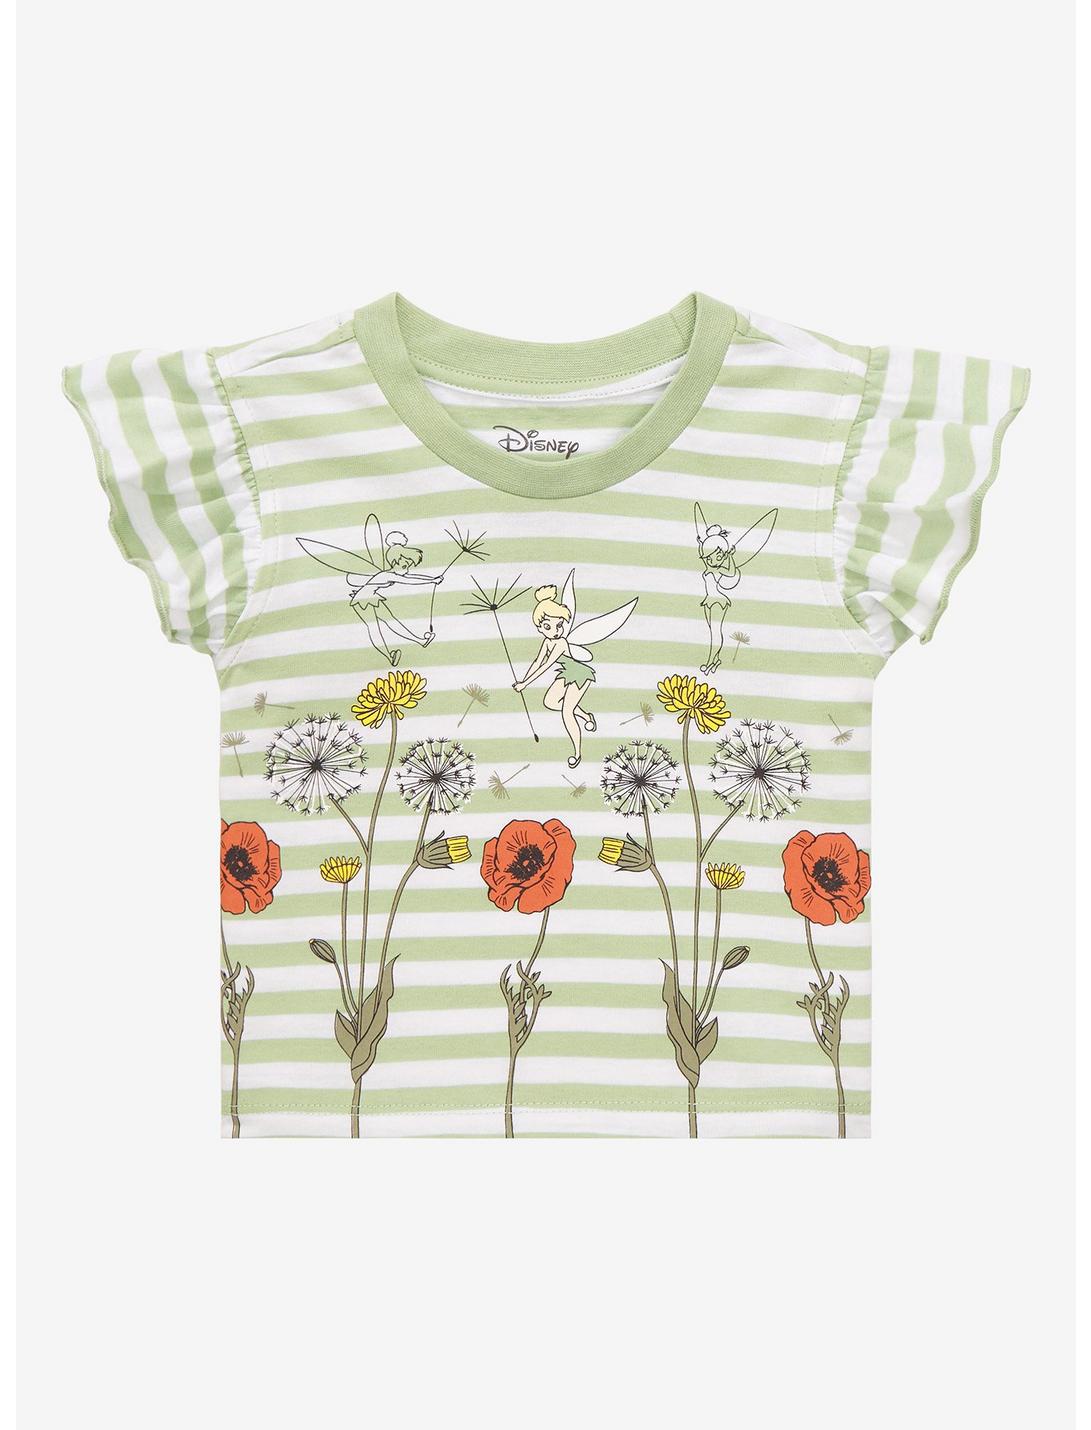 Our Universe Disney Peter Pan Tinker Bell Striped Ruffled Toddler T-Shirt - BoxLunch Exclusive, BASIC STRIPE WHITE, hi-res